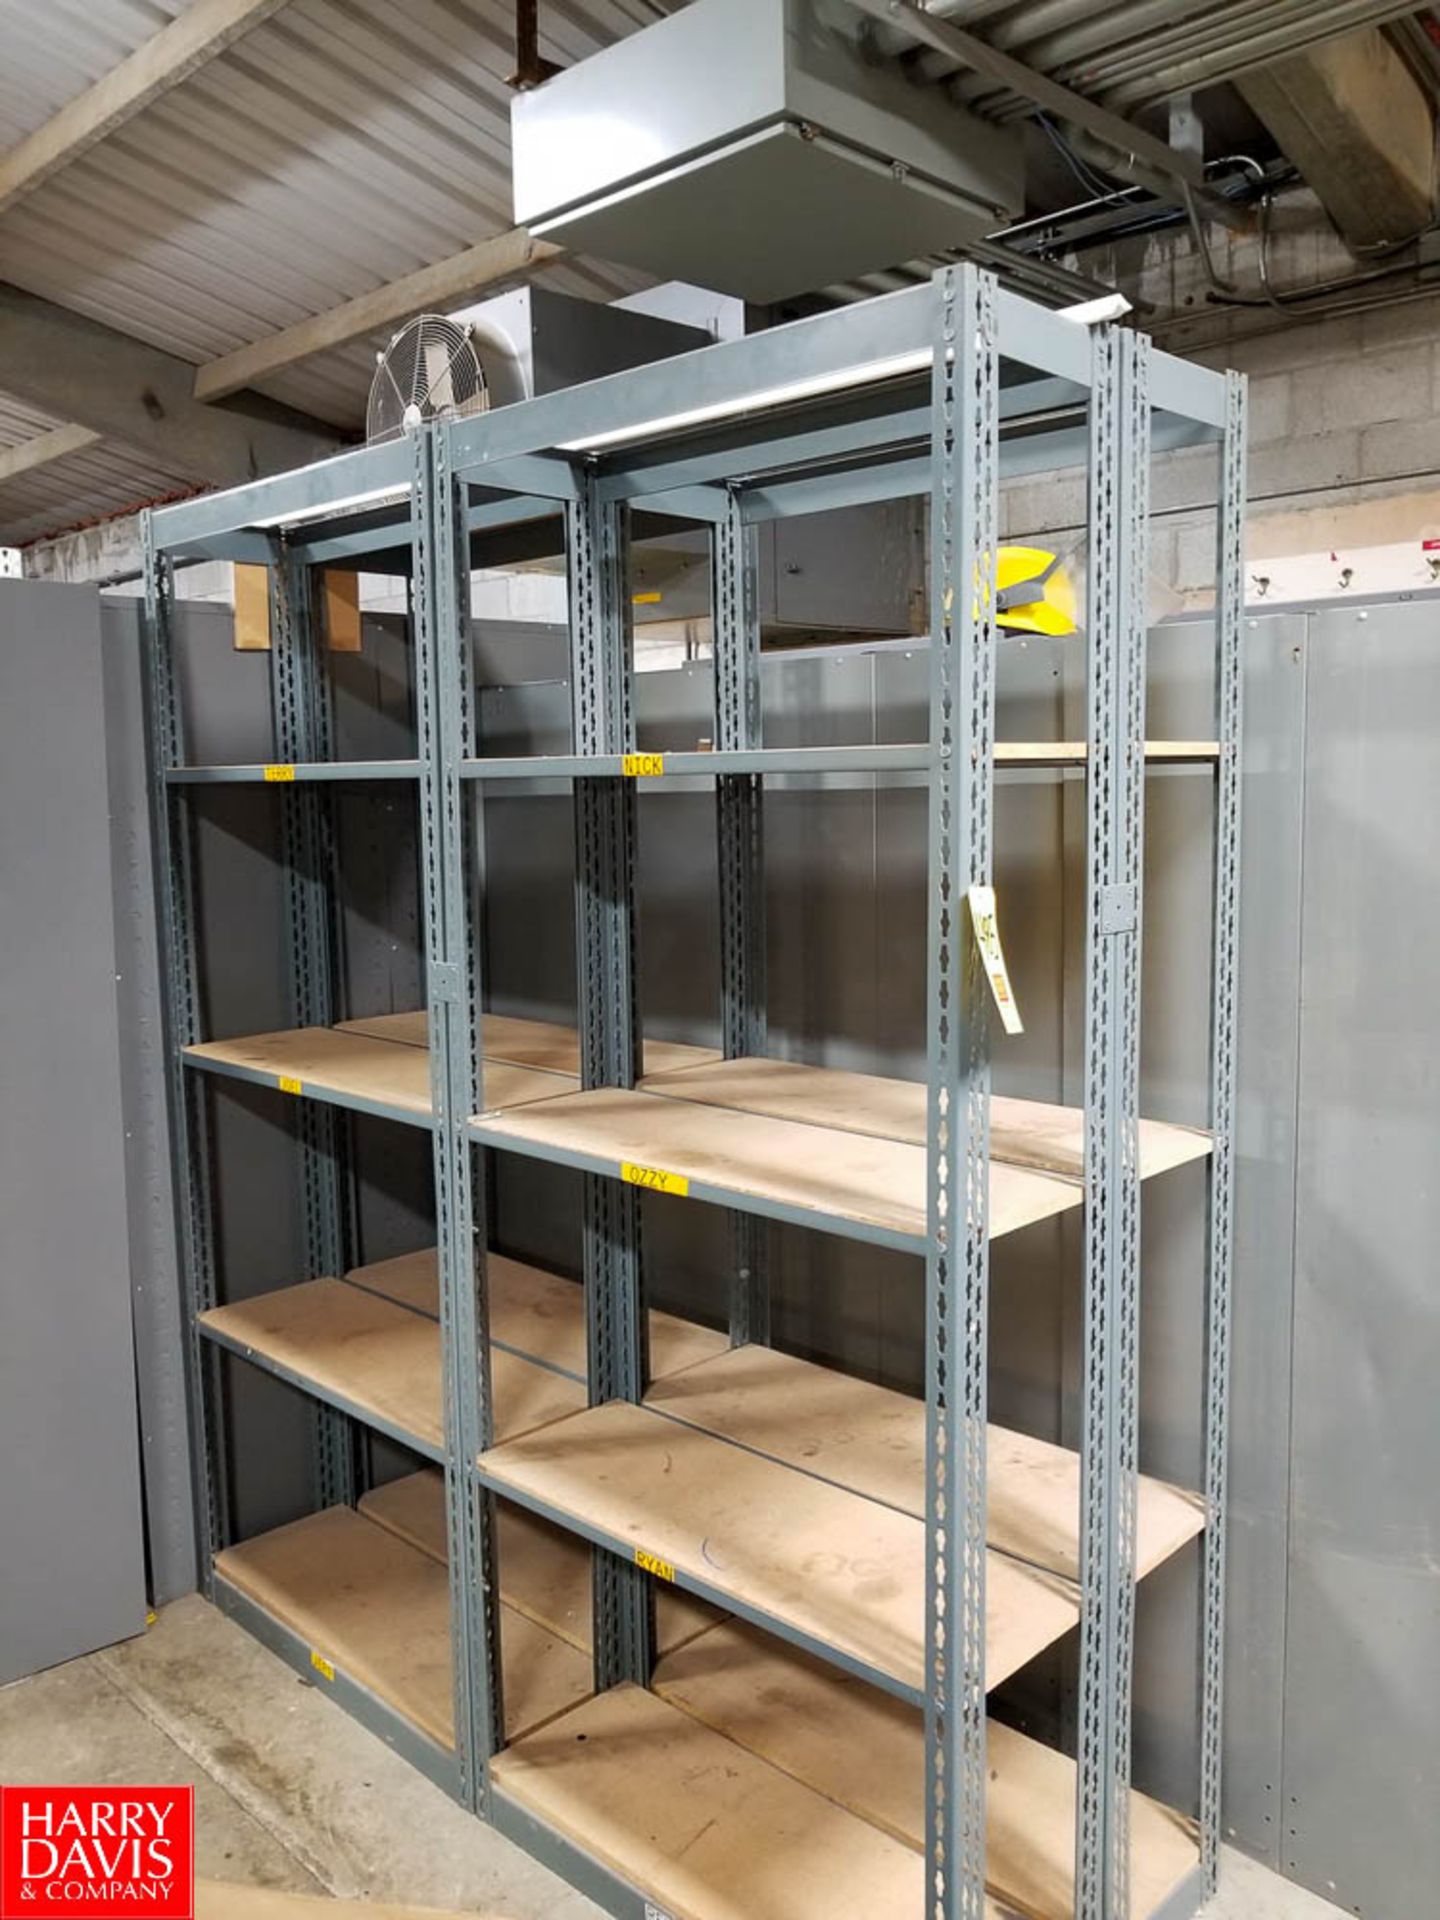 Adjustable Shelving Unit **Contents Not Included - Rigging Fee: $175